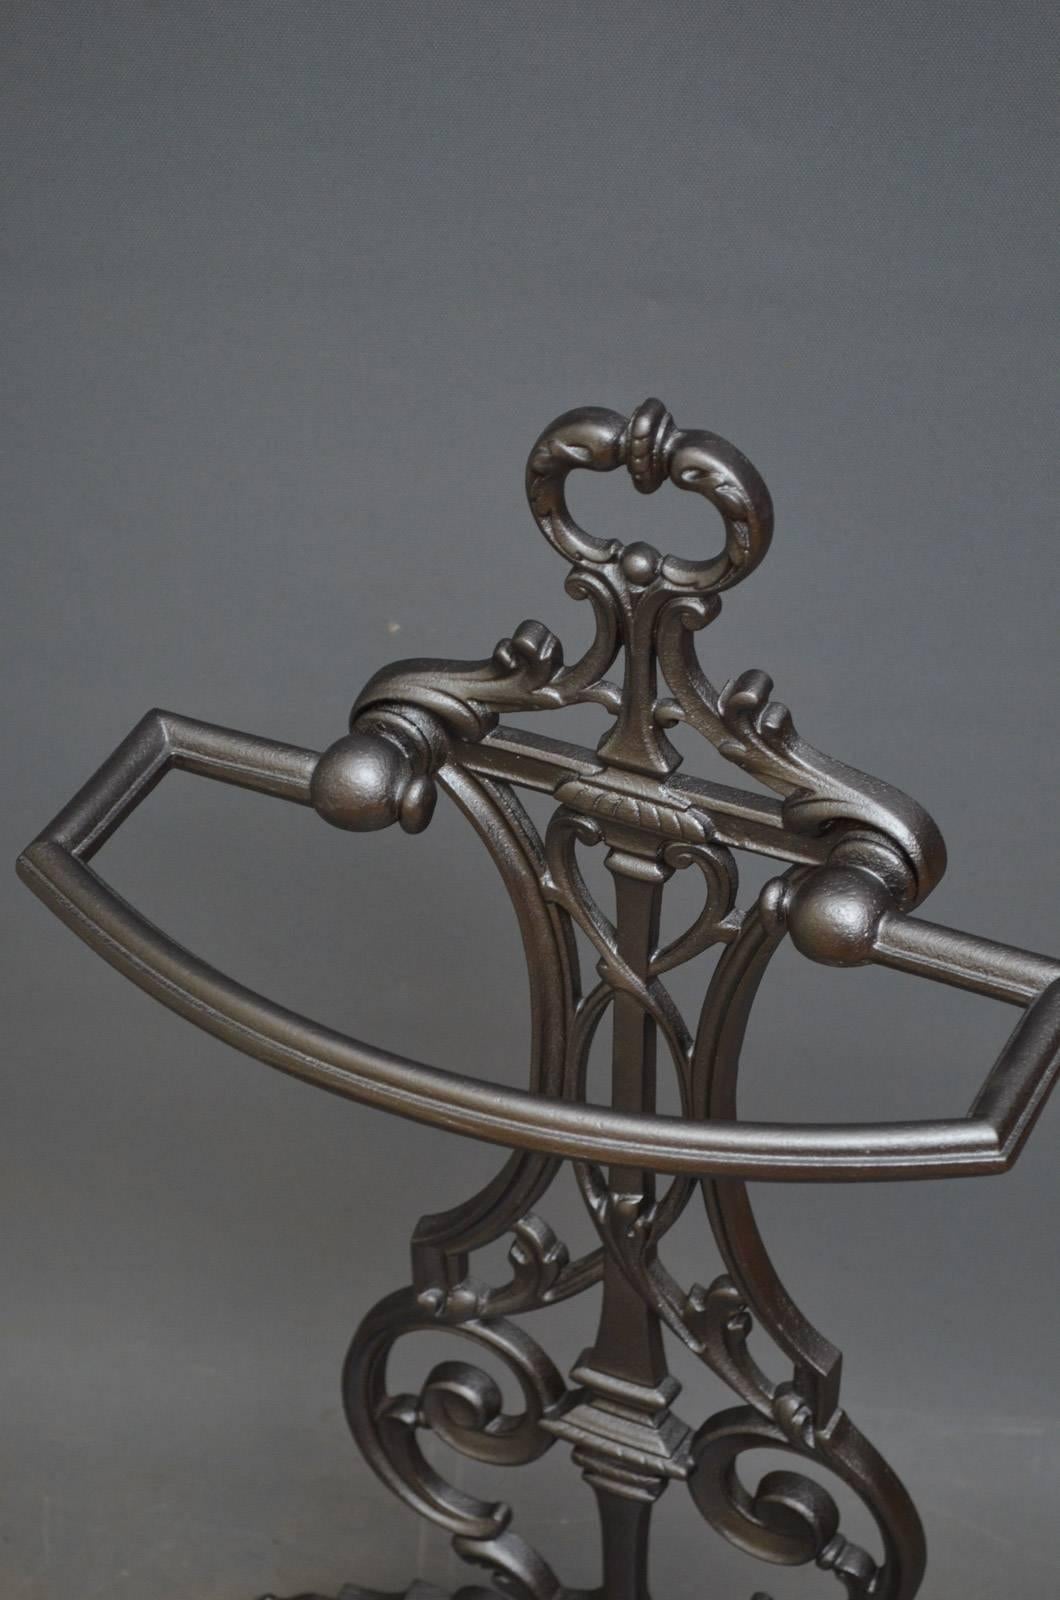 K0291 Art Nouveau cast iron hall stand / stick stand with floral design and original drip tray, circa 1880
Measures: H 28